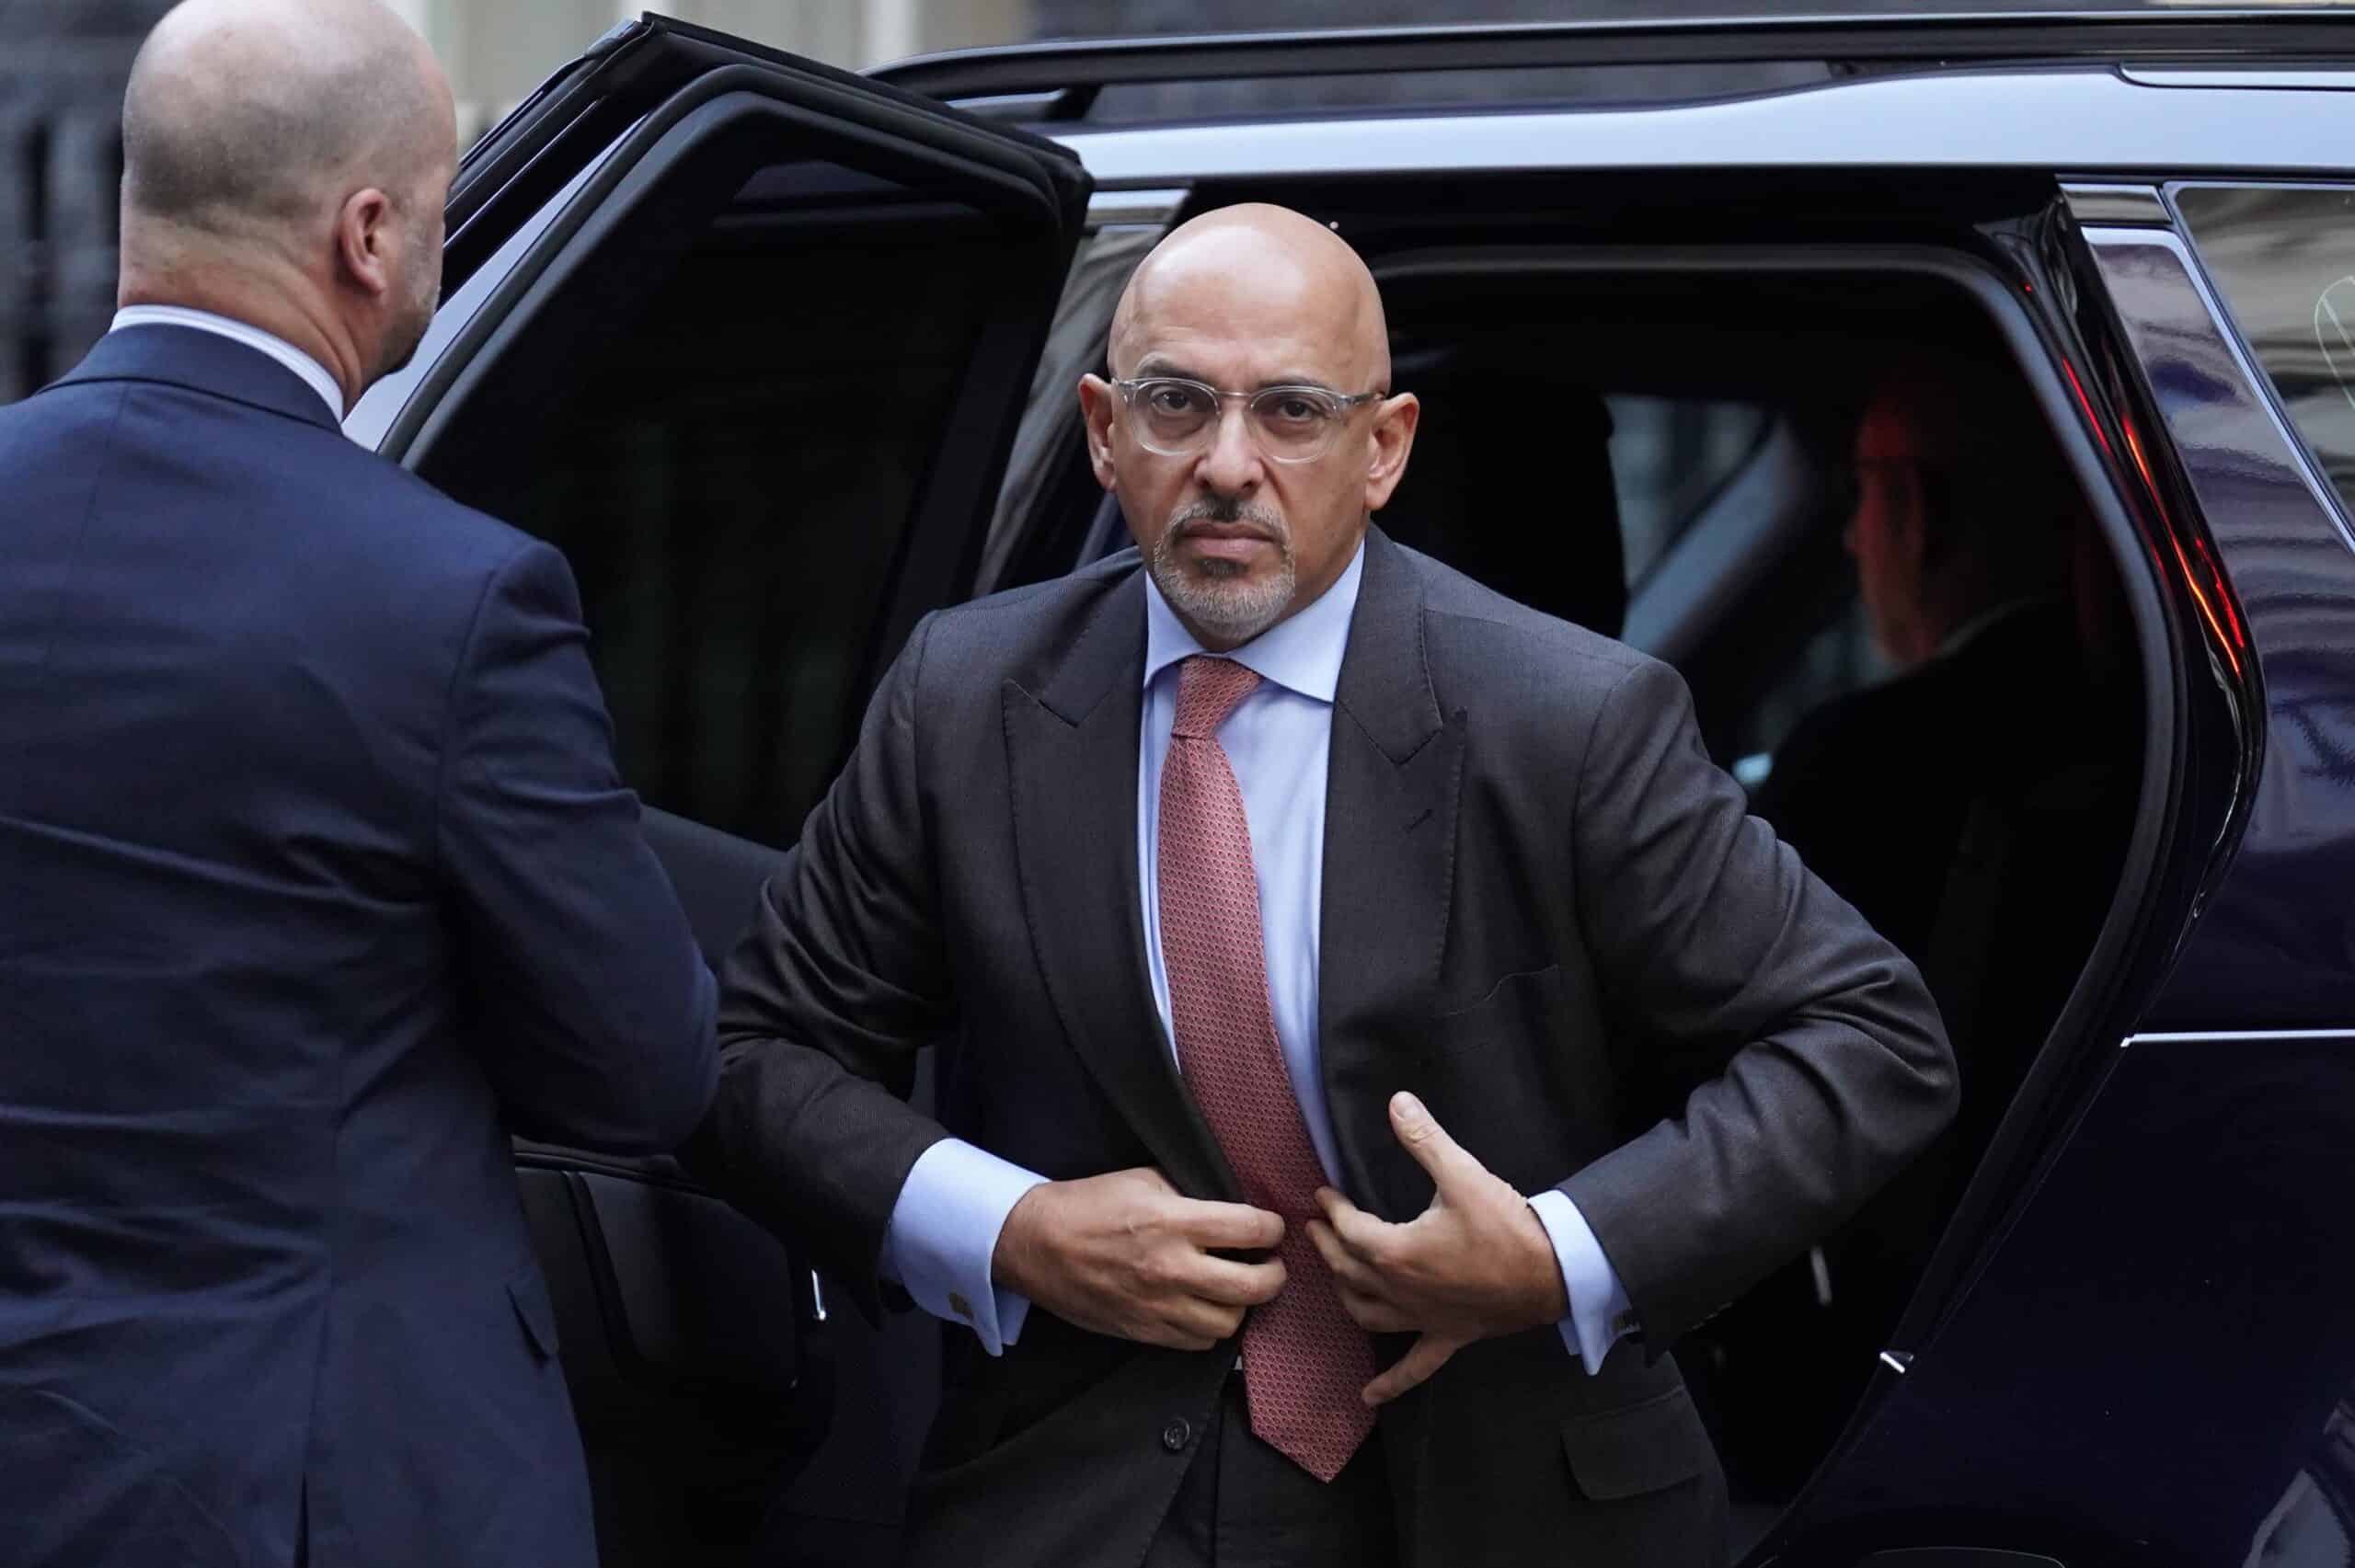 Nadhim Zahawi racked up £1k limousine bill in a day at COP26 conference